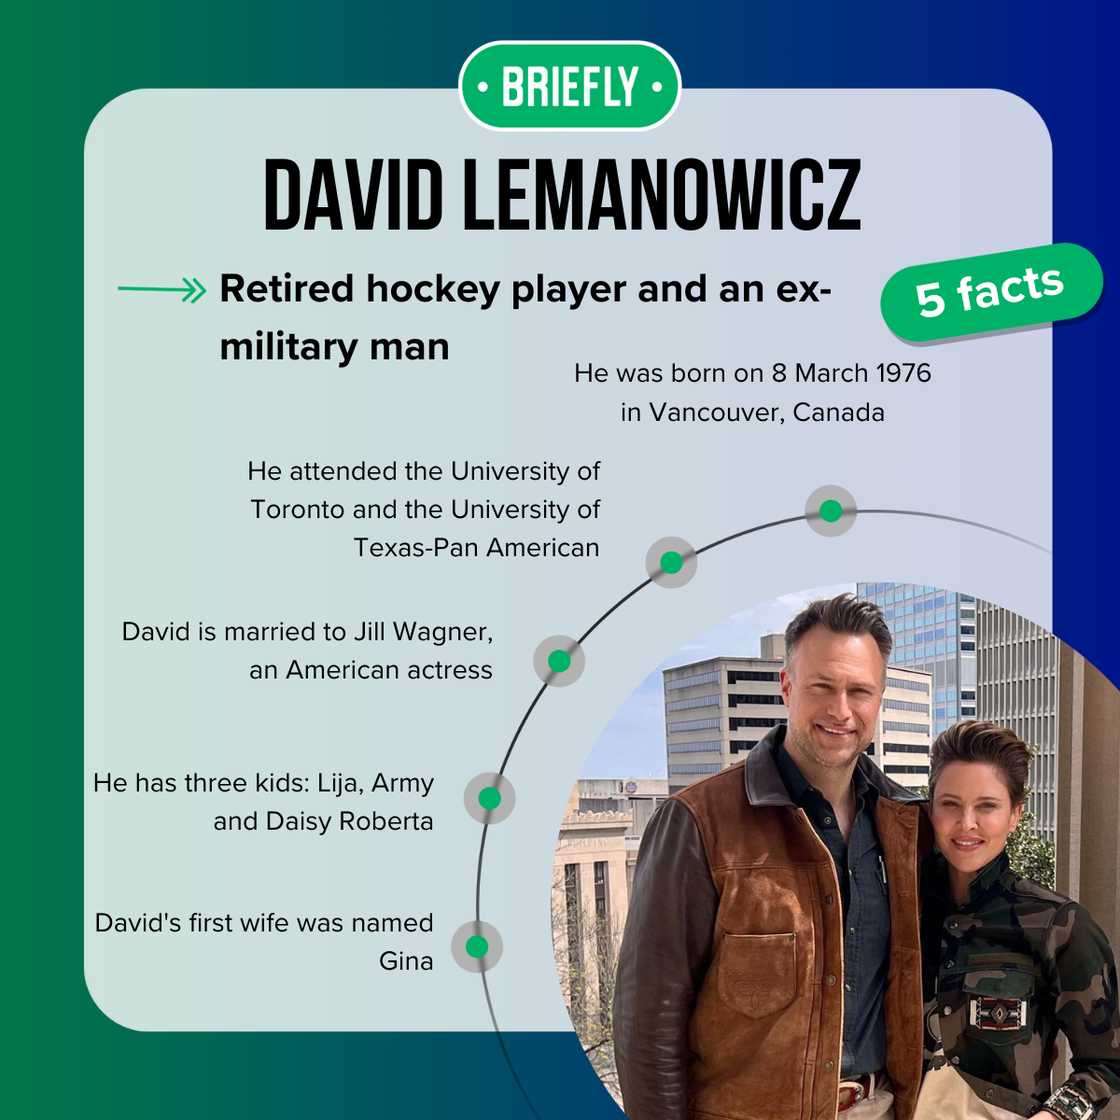 Top 5 facts about David Lemanowicz